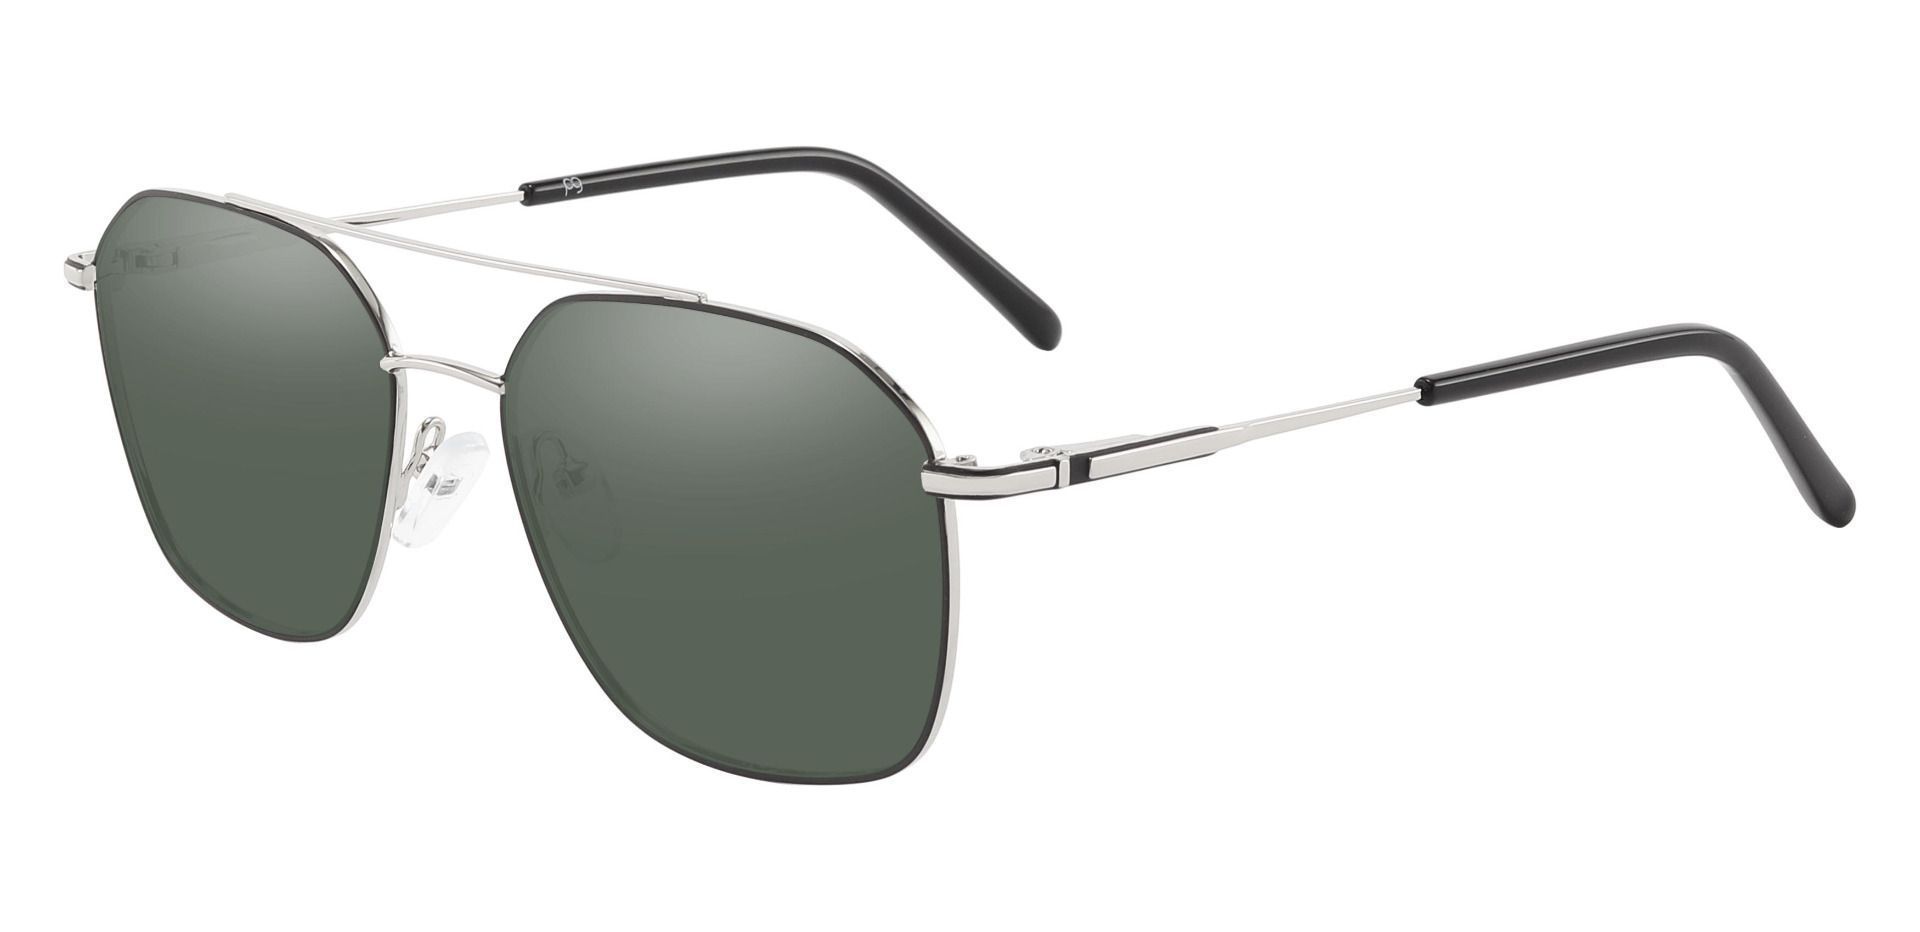 Harvey Aviator Lined Bifocal Sunglasses - Silver Frame With Green Lenses